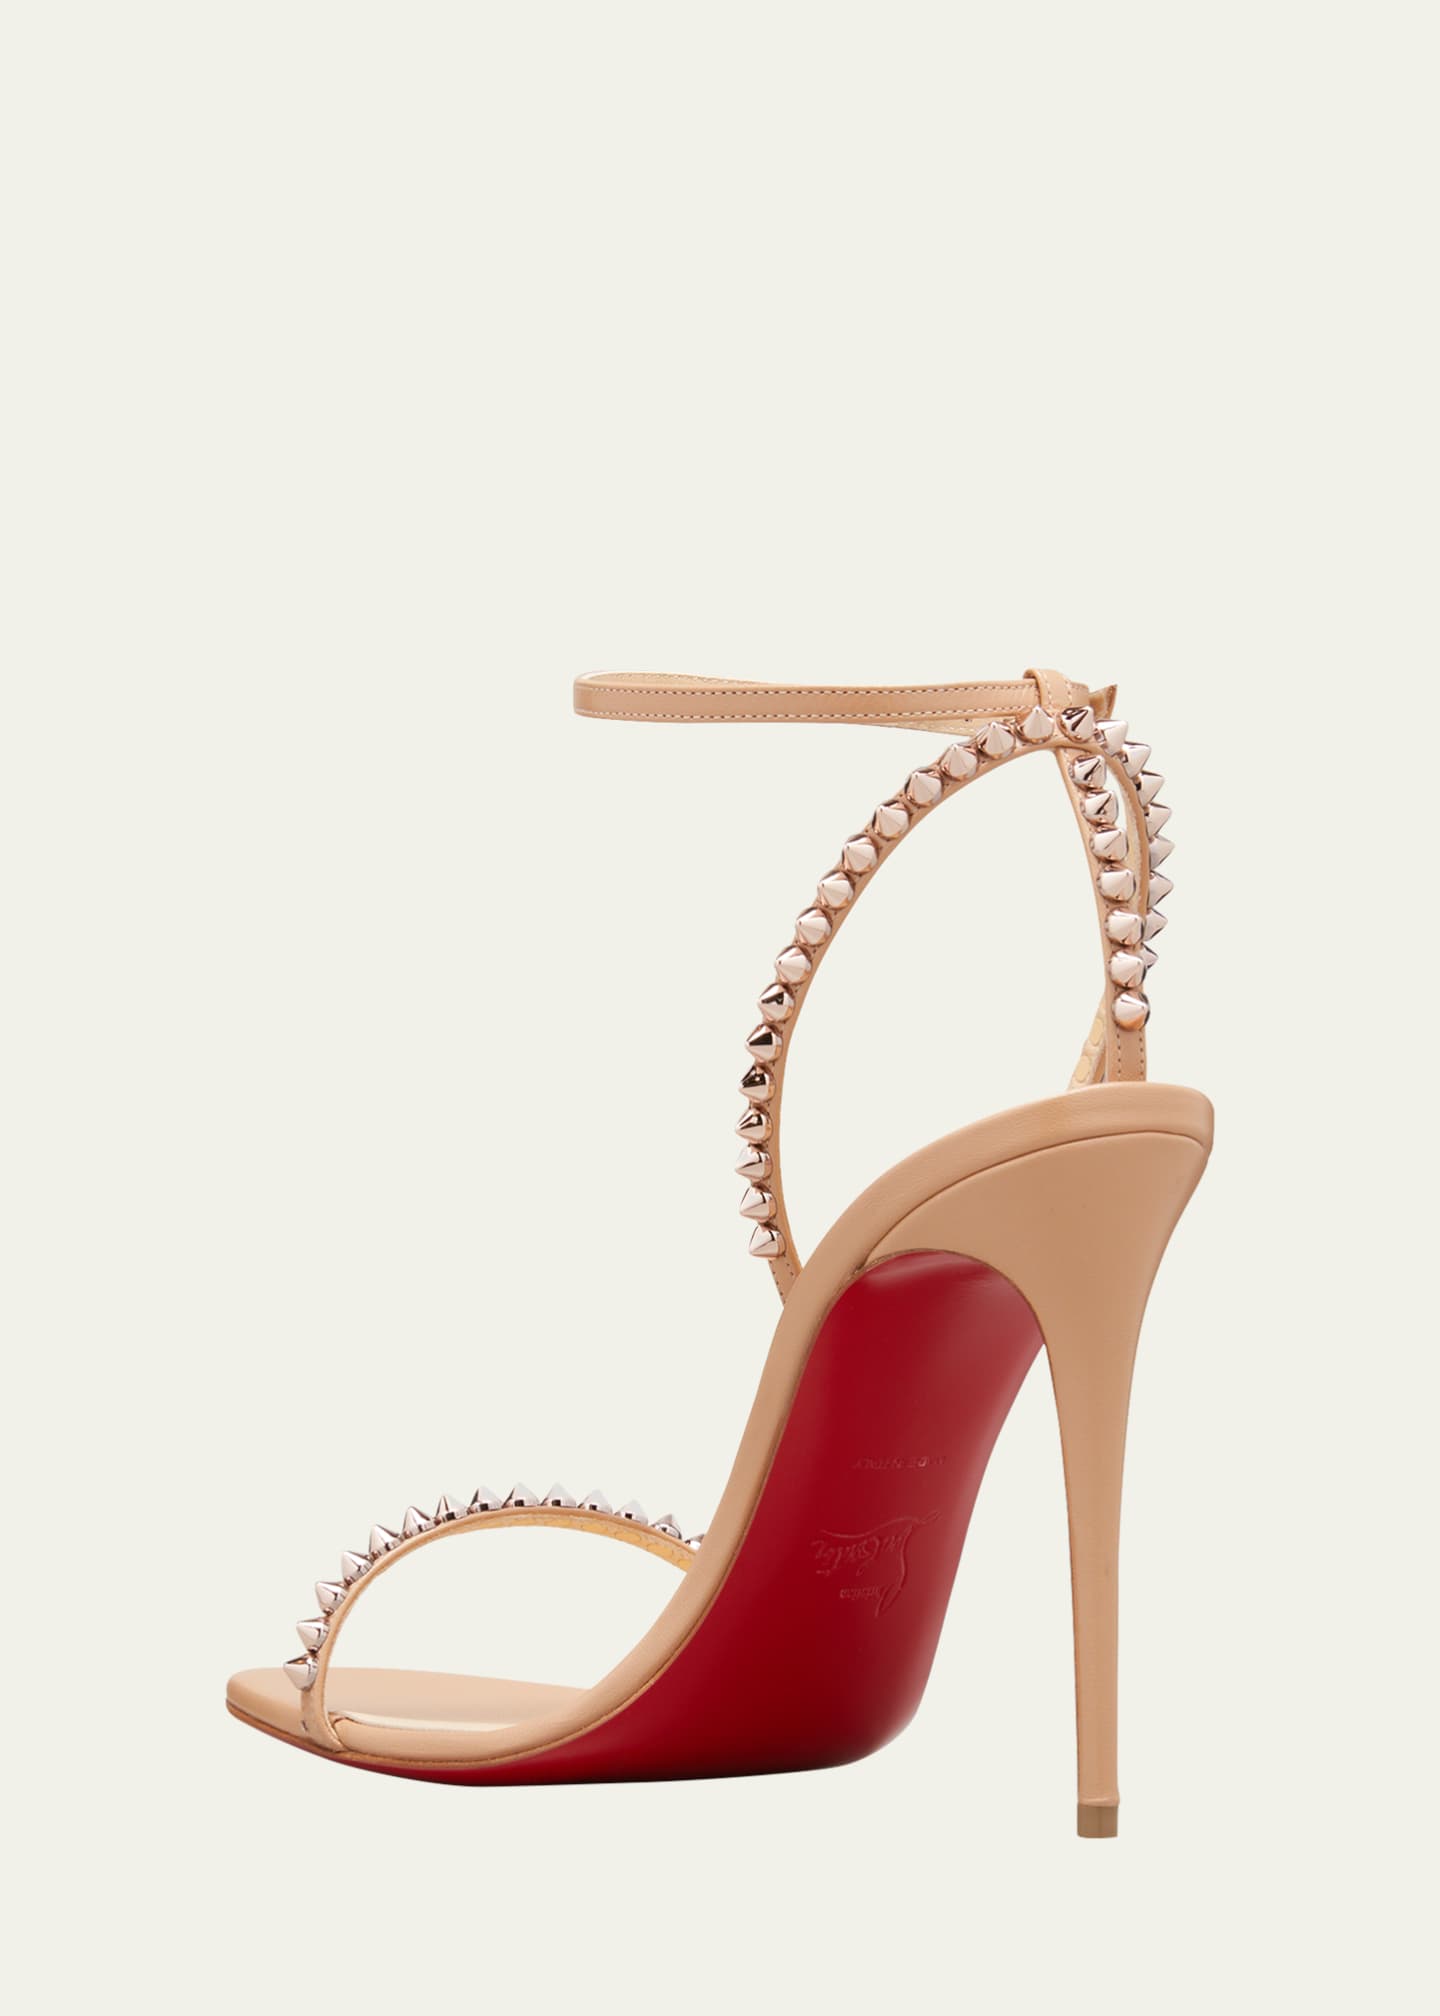 red bottom heels with spikes, christian louboutin shoes prices